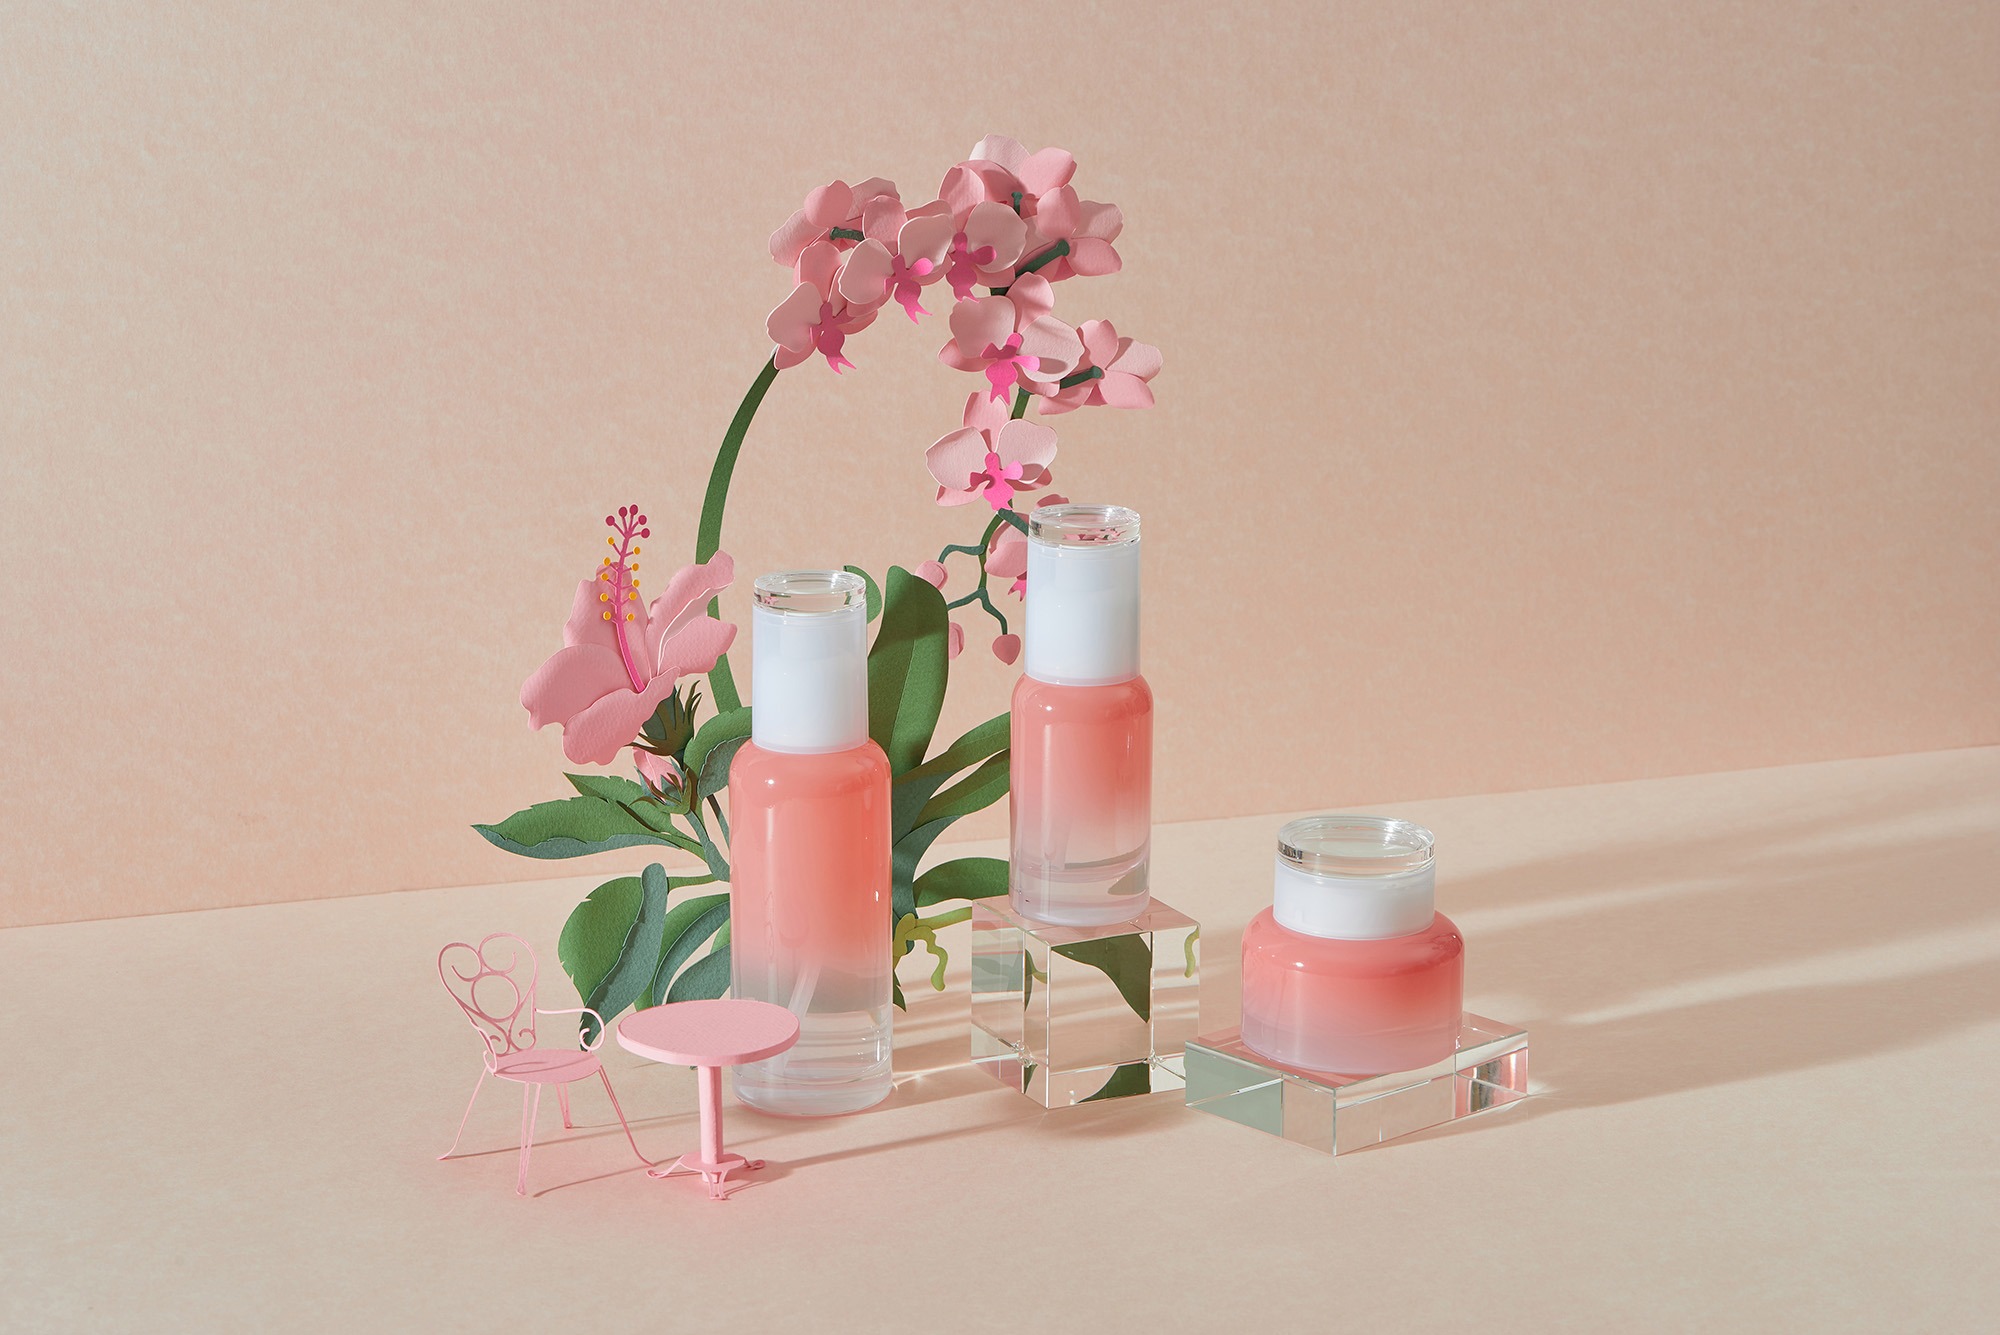 Natural cosmetics, fresh as flowers with orchid made from paper